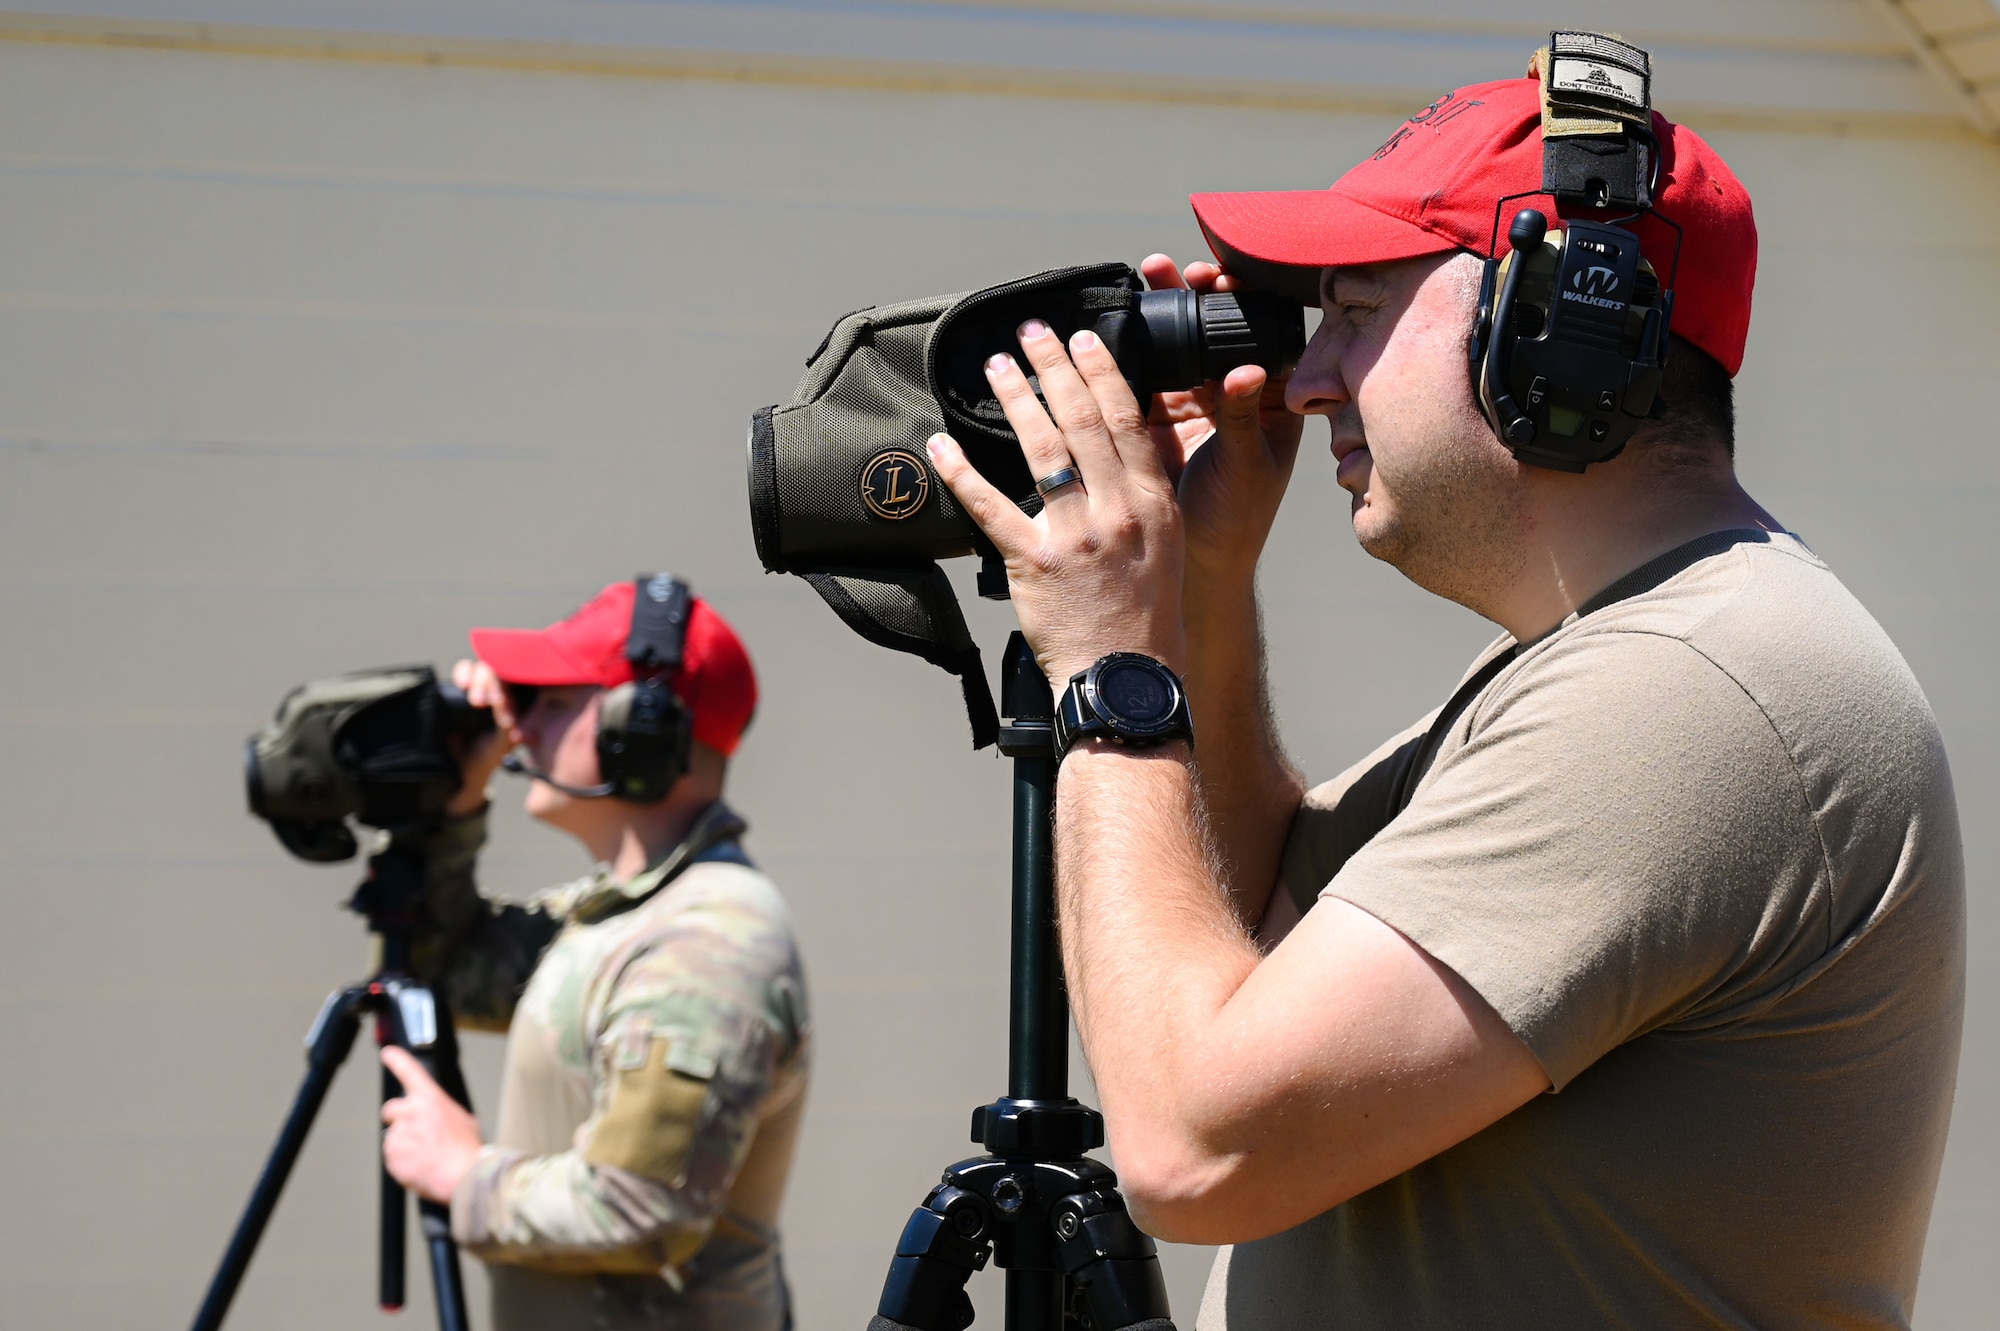 Airmen from the 19th Security Forces Squadron combat arms training and maintenance team check targets during an Advanced Designated Marksman course